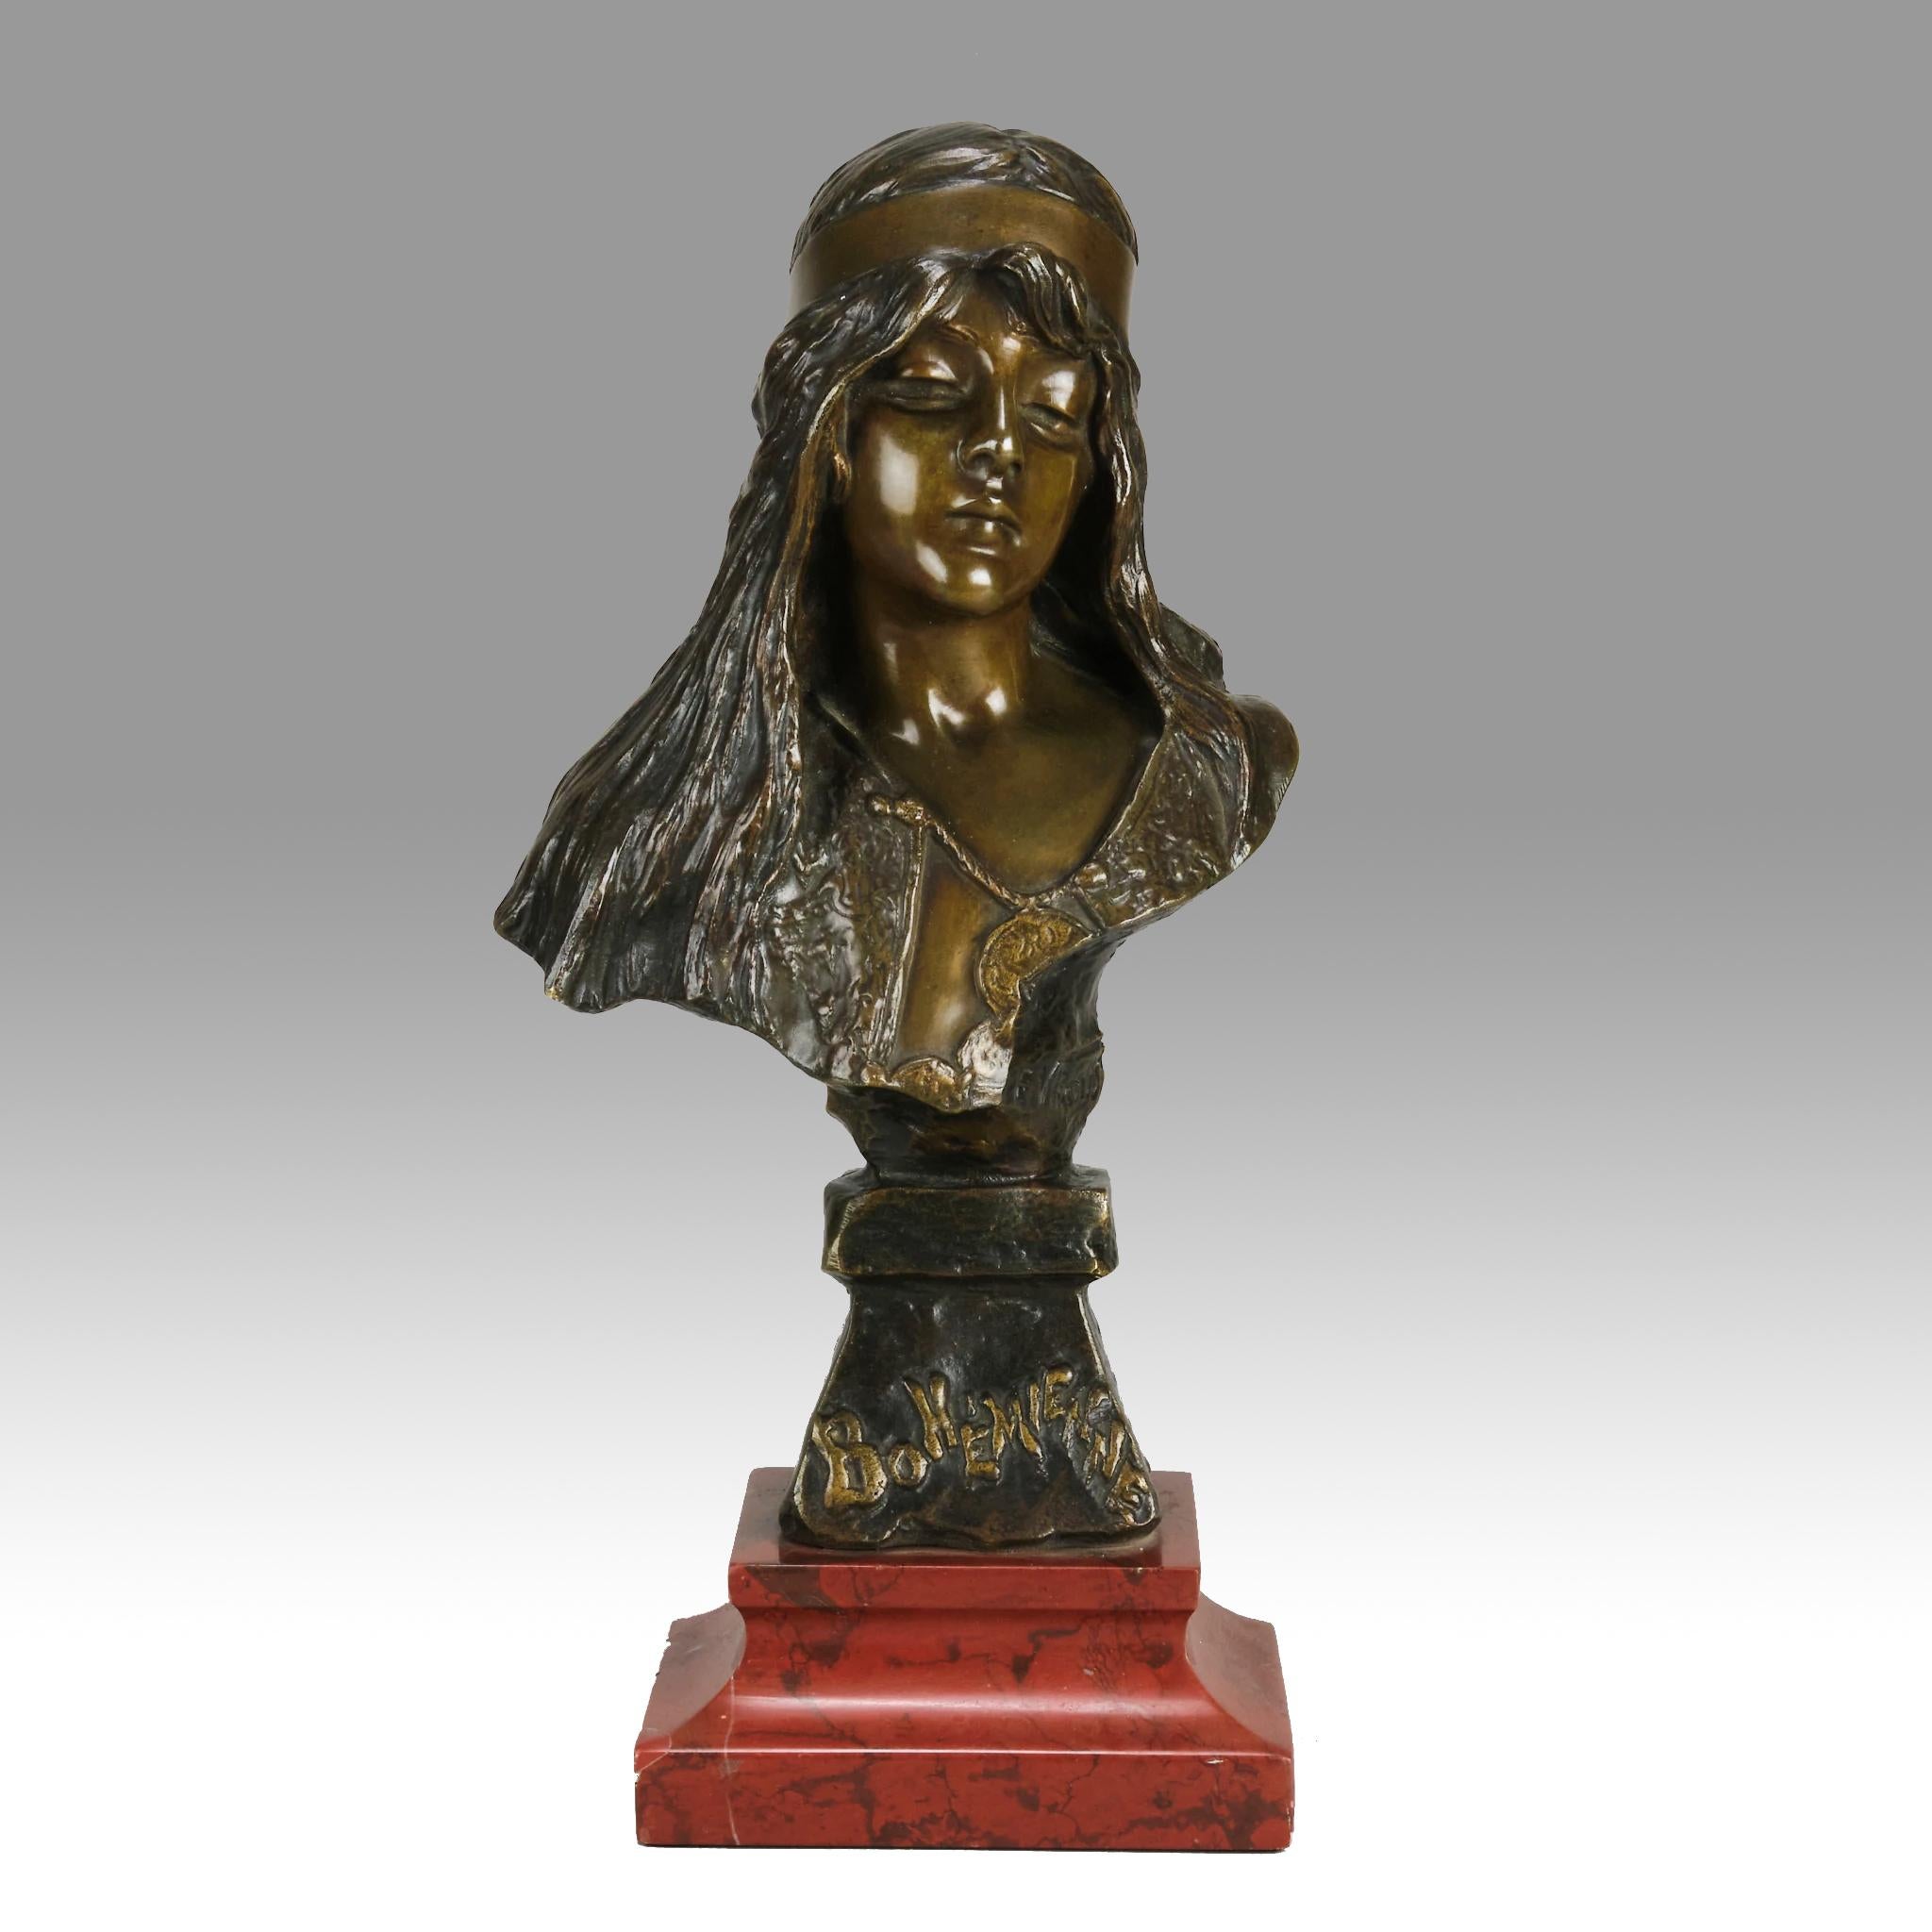 Captivating late 19th century French bronze bust of a beautiful woman, enhanced by the variegated rich brown patination and excellent tactile surface detail, raised on an integral bronze base with raised title to the fore. Signed ?E Villanis and